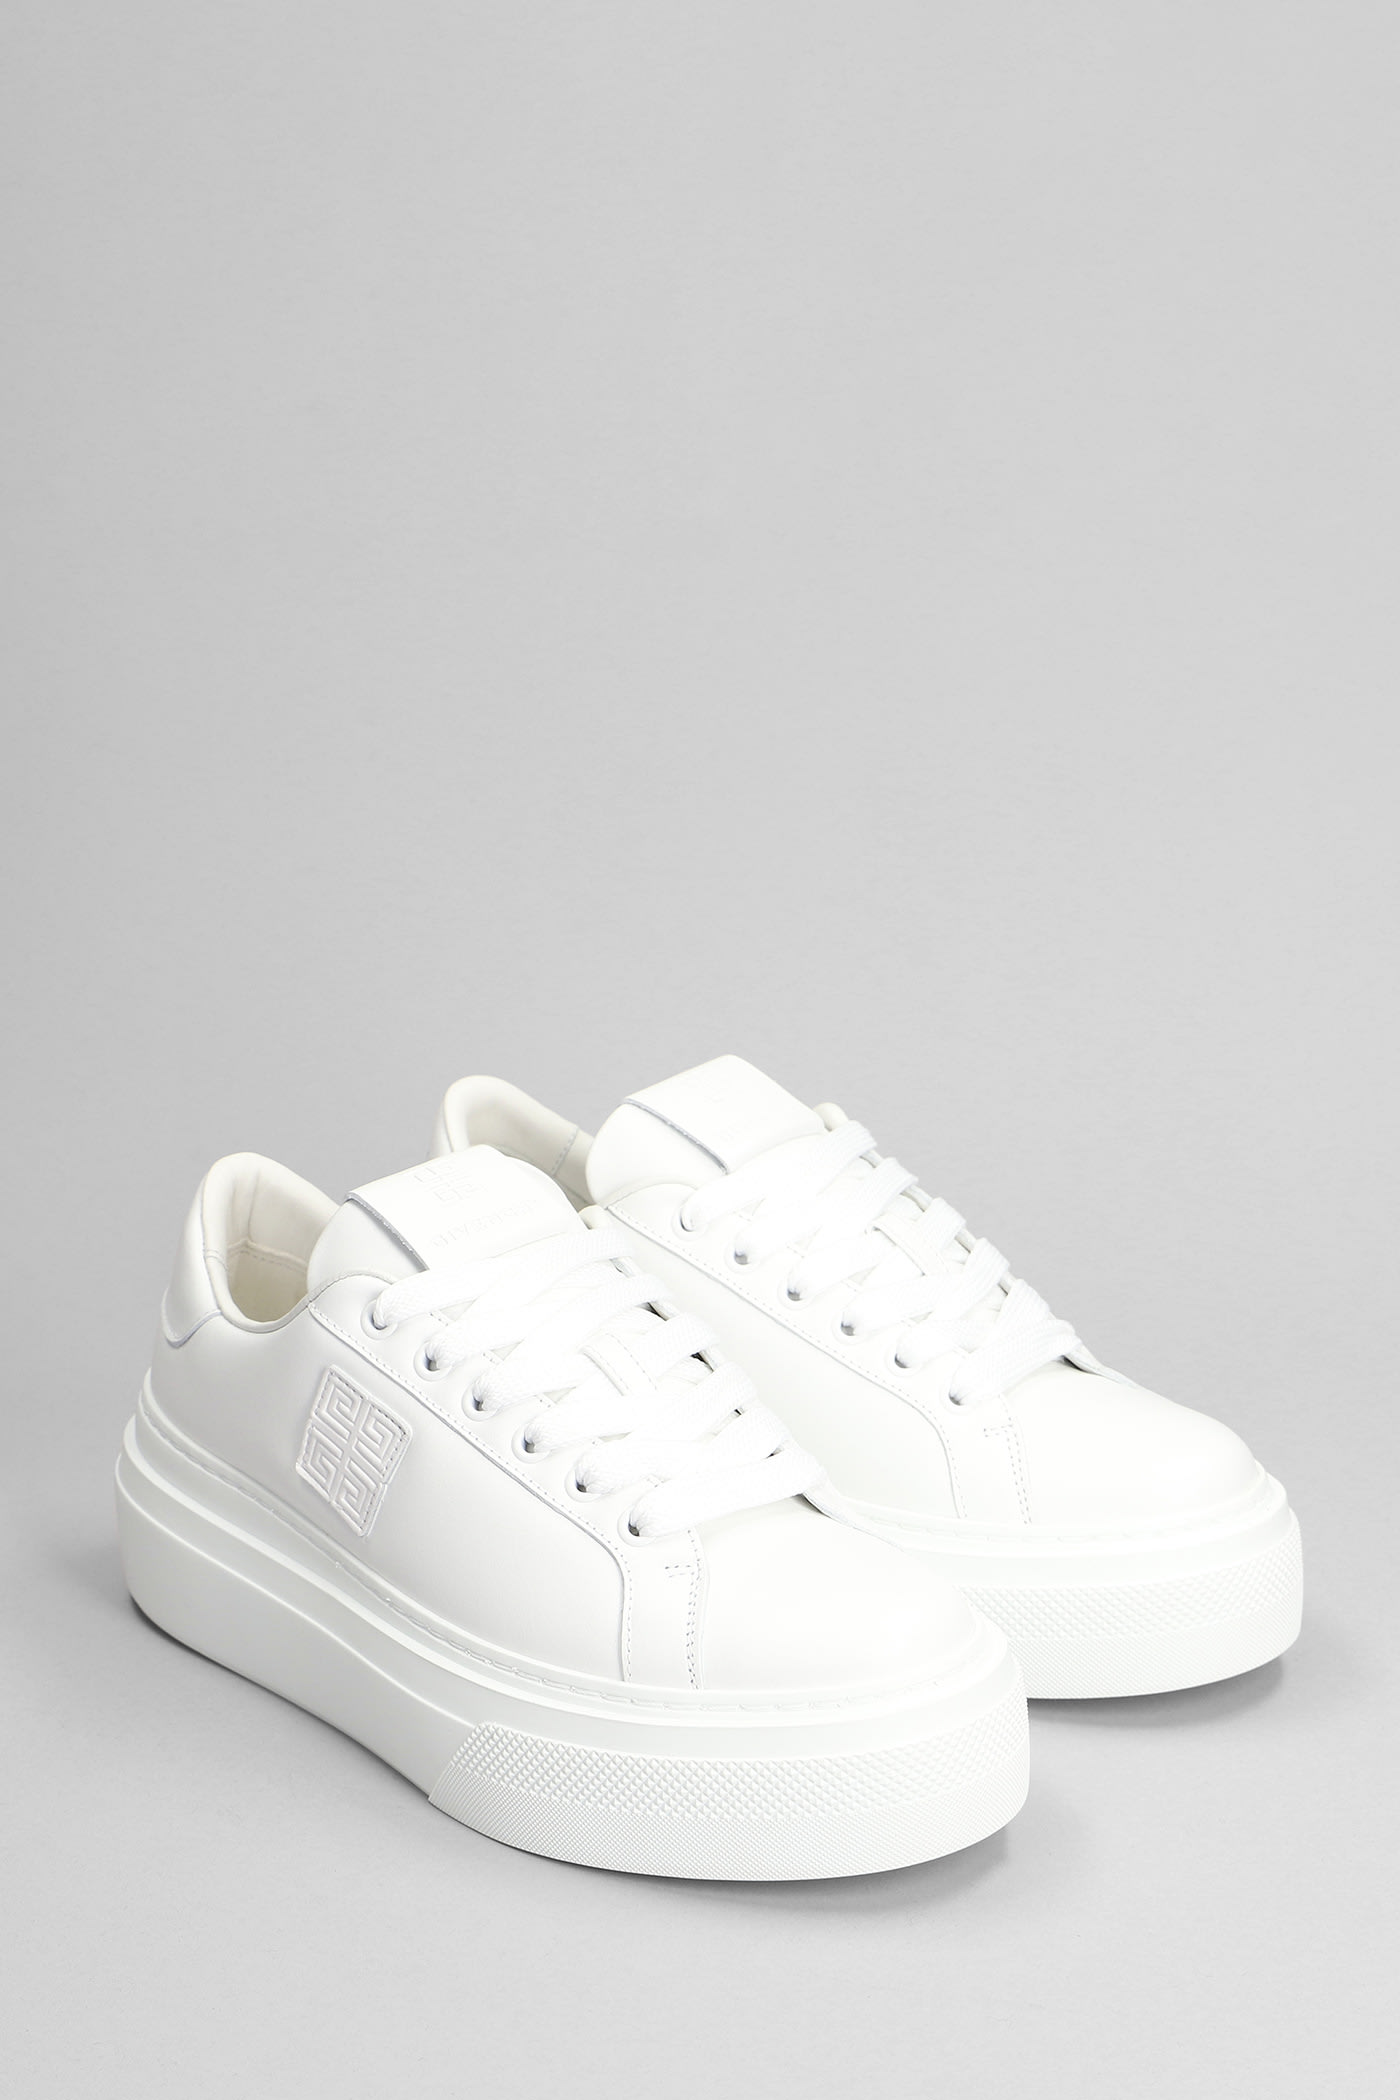 Shop Givenchy City Platform Sneakers In White Leather